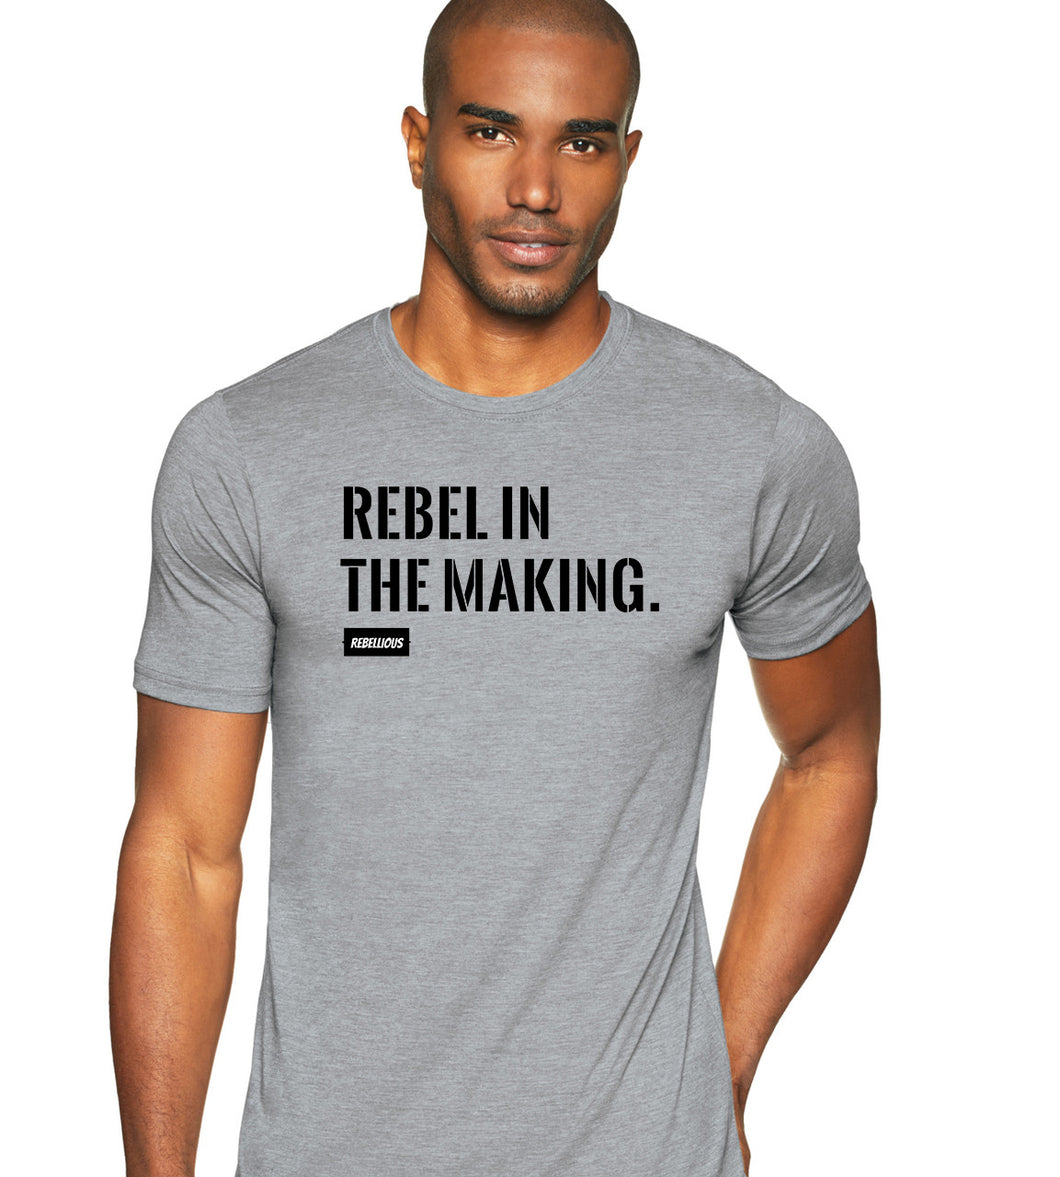 T-Shirt: Rebel in the Making